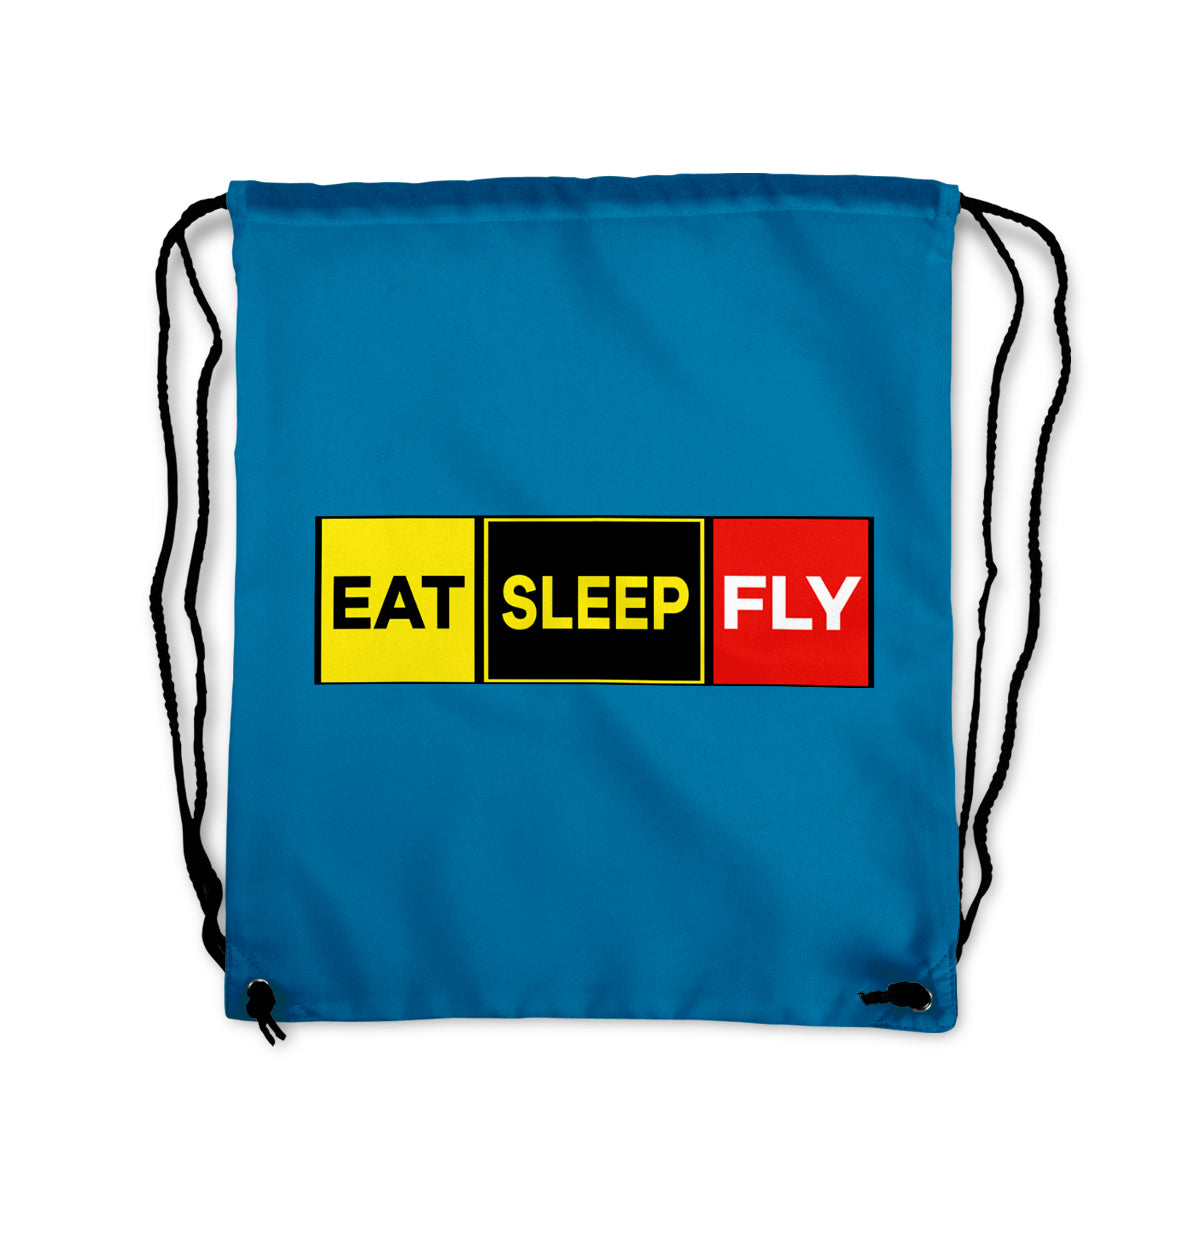 Eat Sleep Fly (Colourful) Designed Drawstring Bags